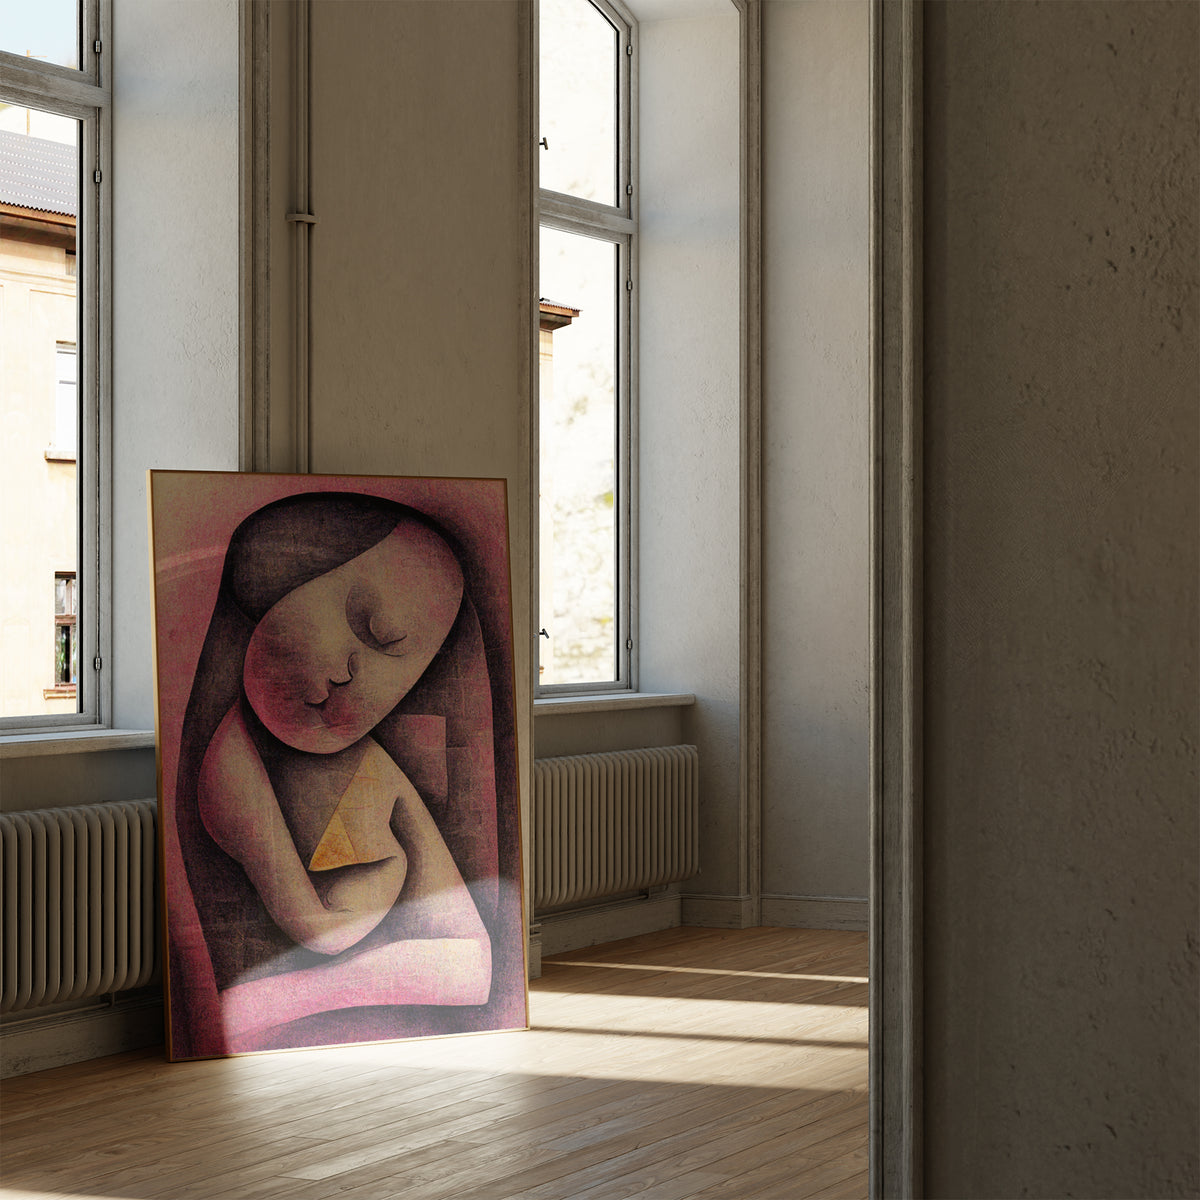 Fetal Ultrasound Art - A heartwarming depiction of pregnancy, ideal for gynecology clinic decor and creating a warm ambiance.